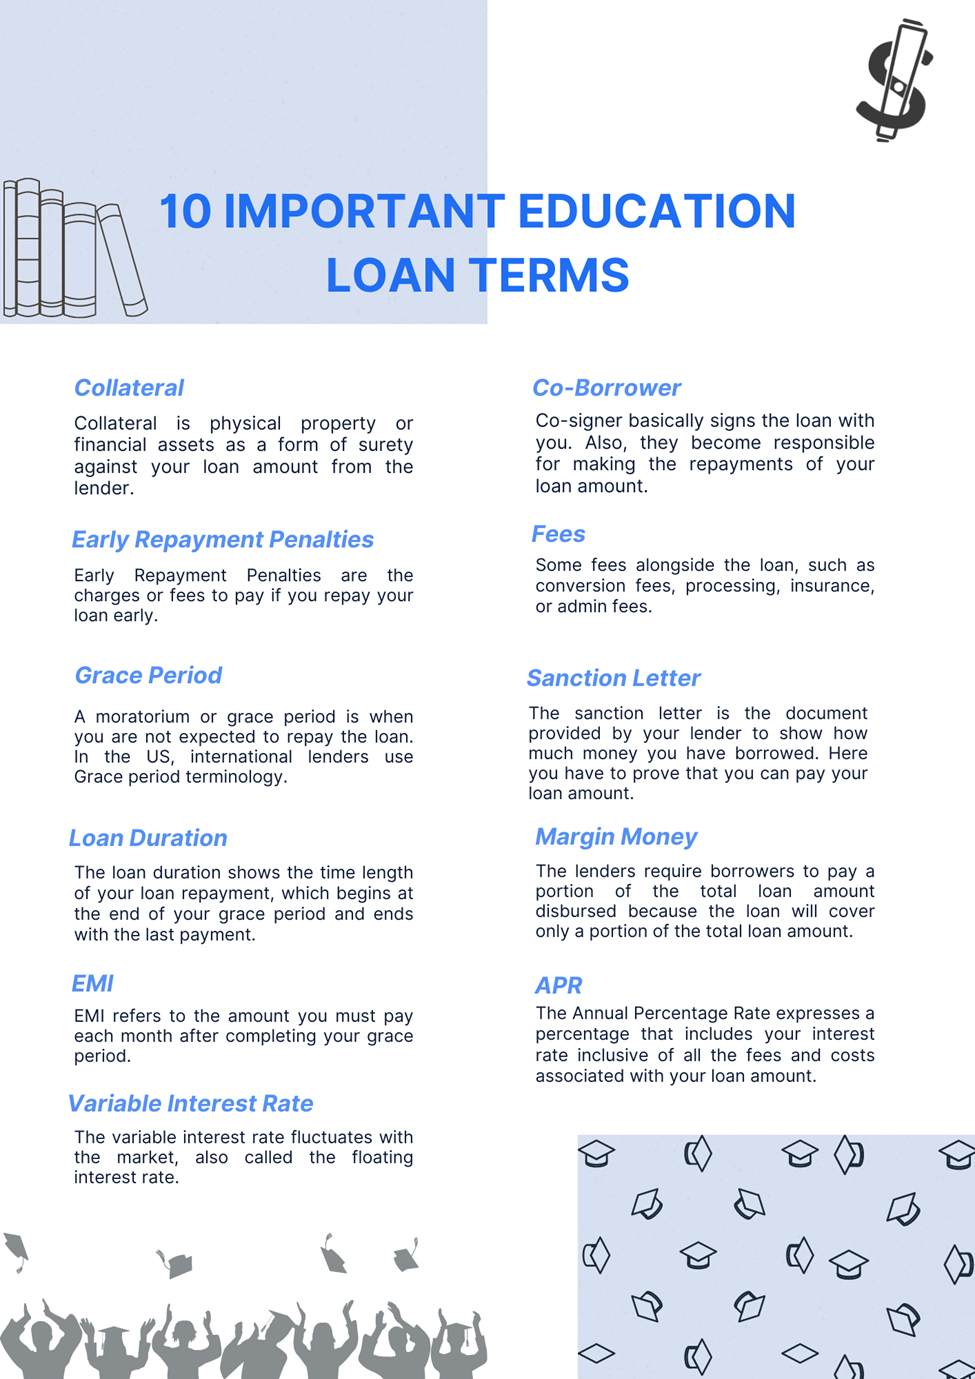 Student Loan Terms and Conditions